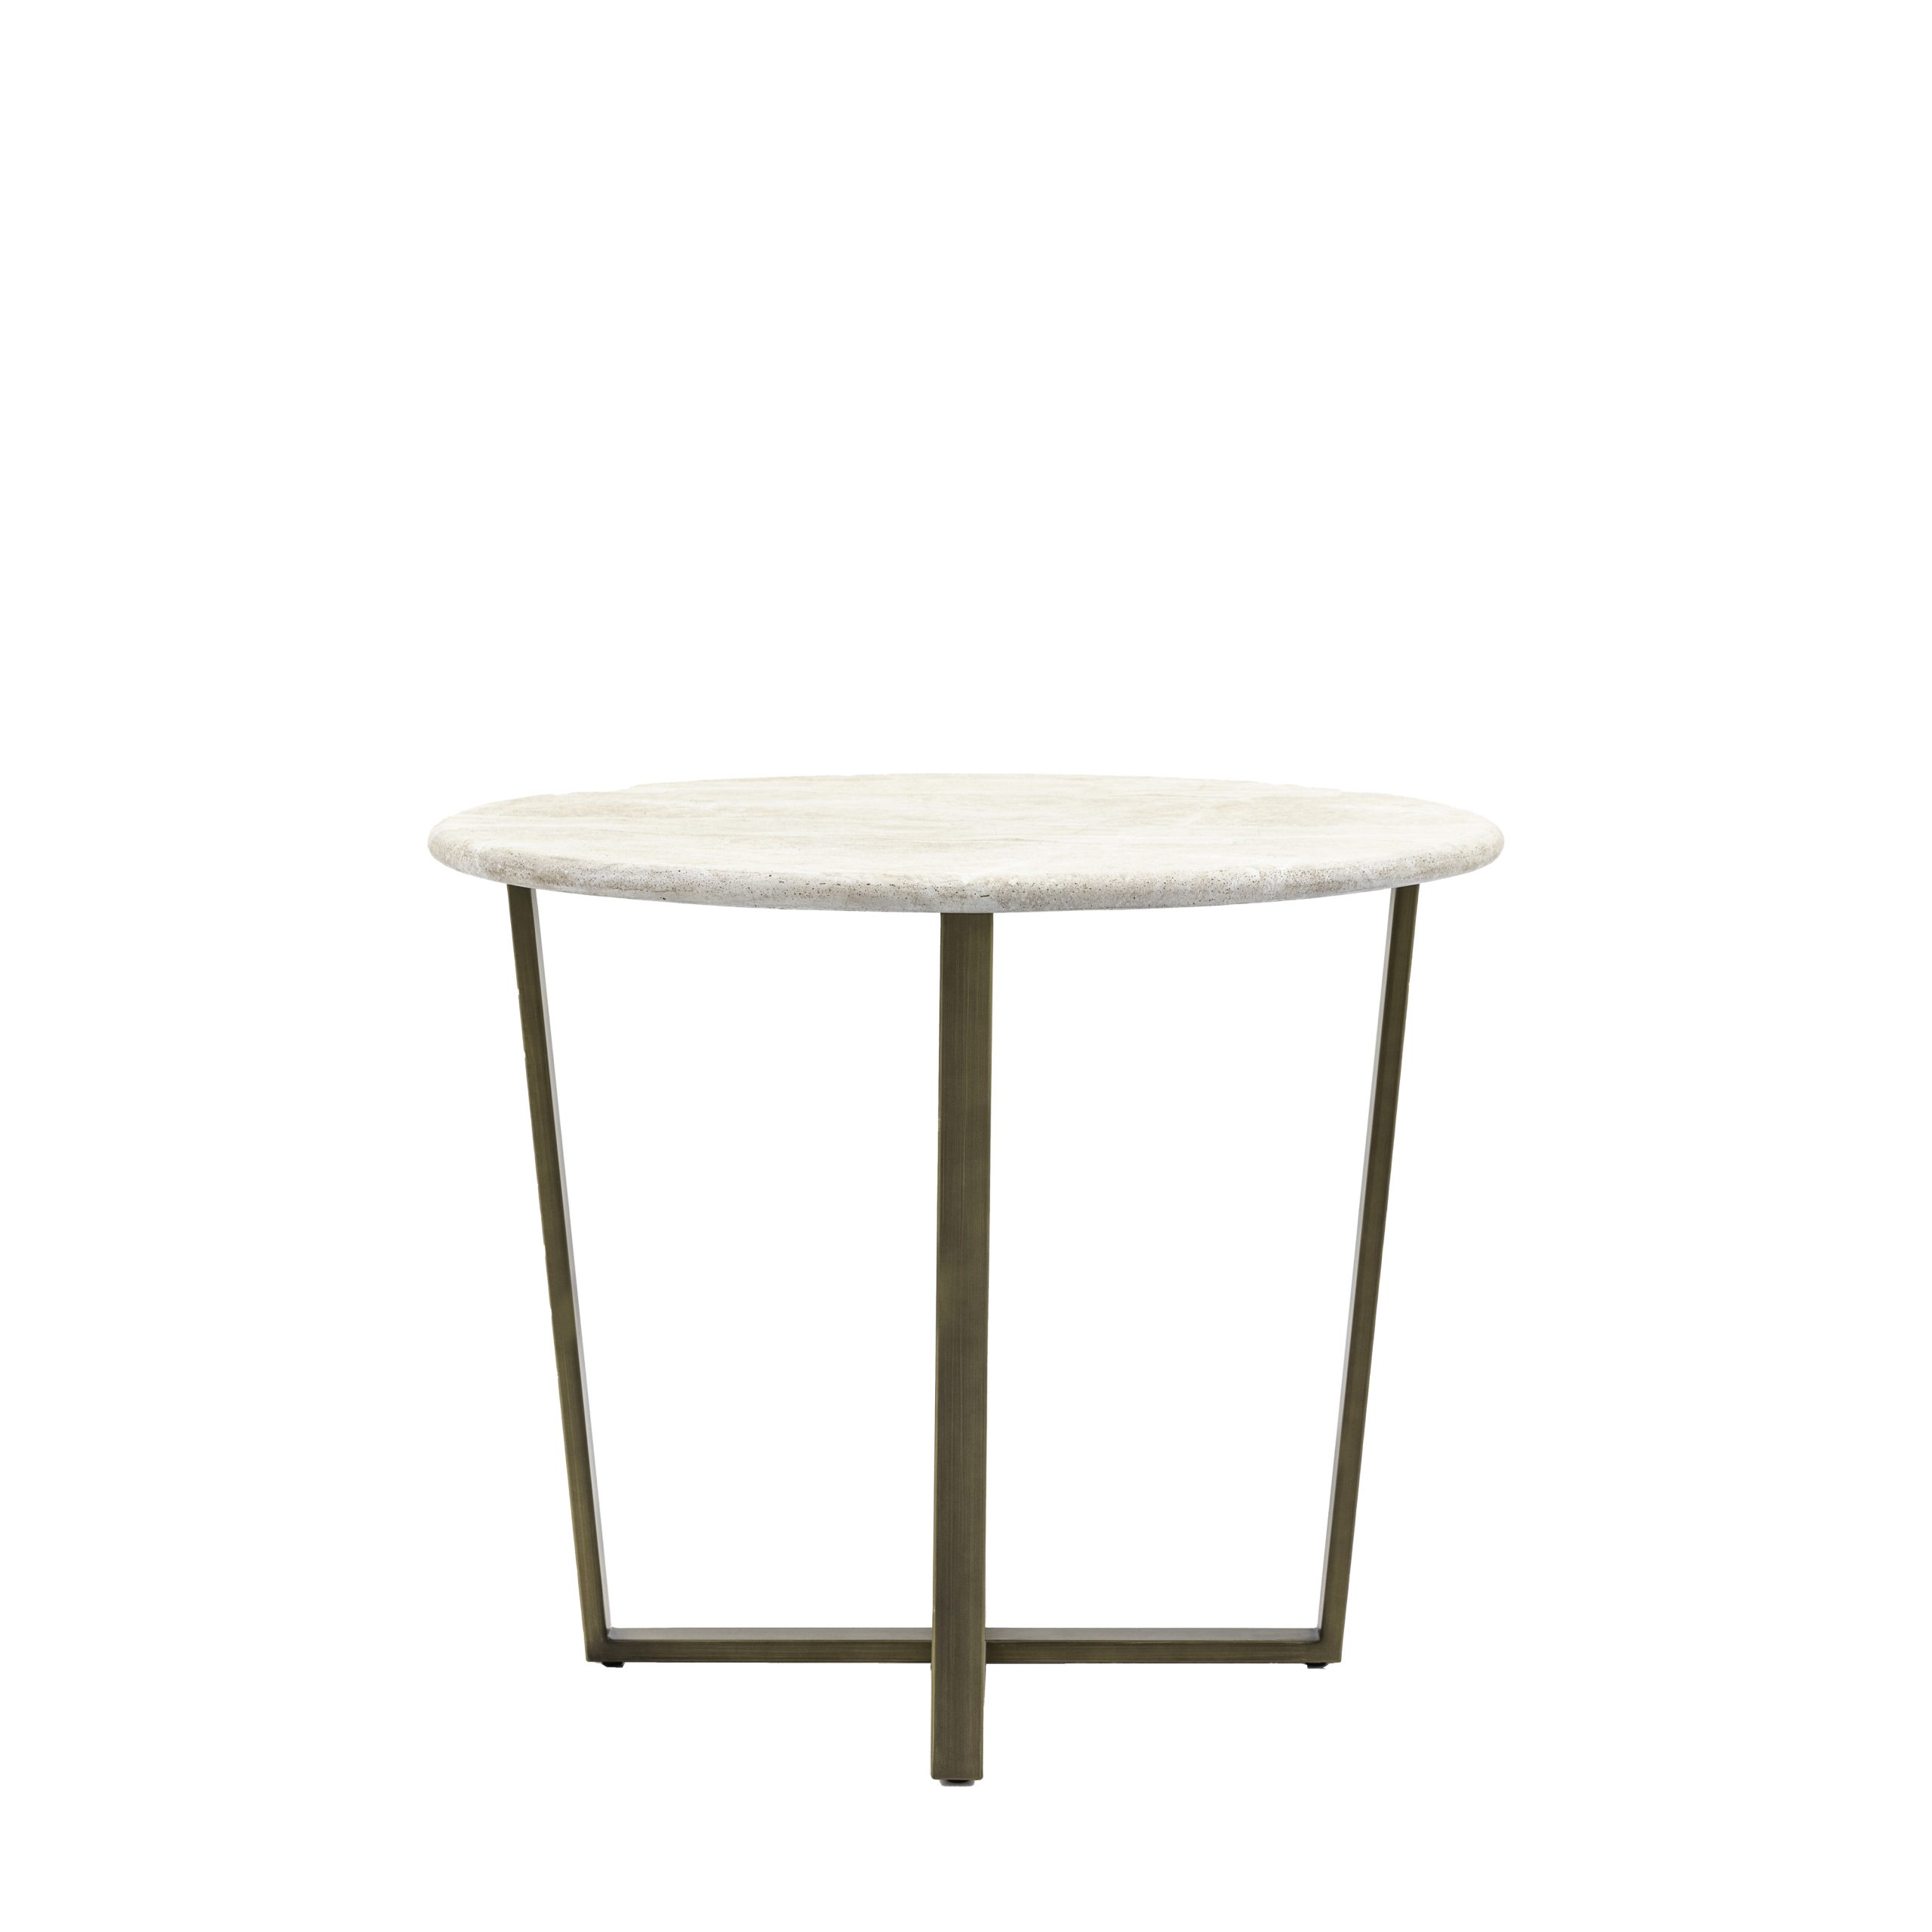 Gallery Direct Moderna Round Dining Table